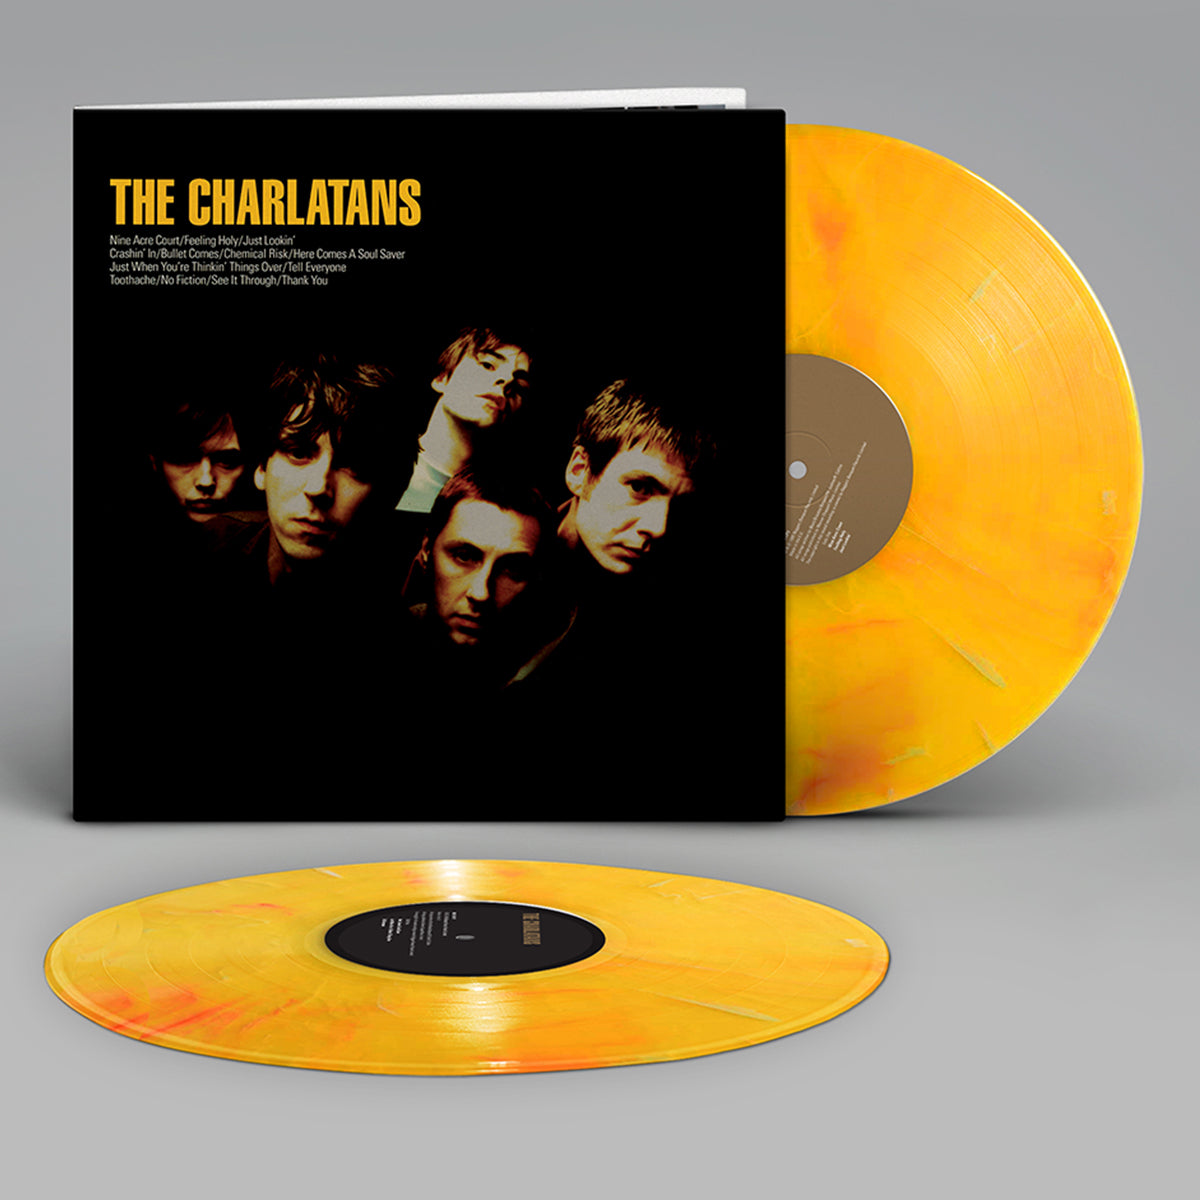 THE CHARLATANS - The Charlatans - 2LP - Marbled Yellow Vinyl